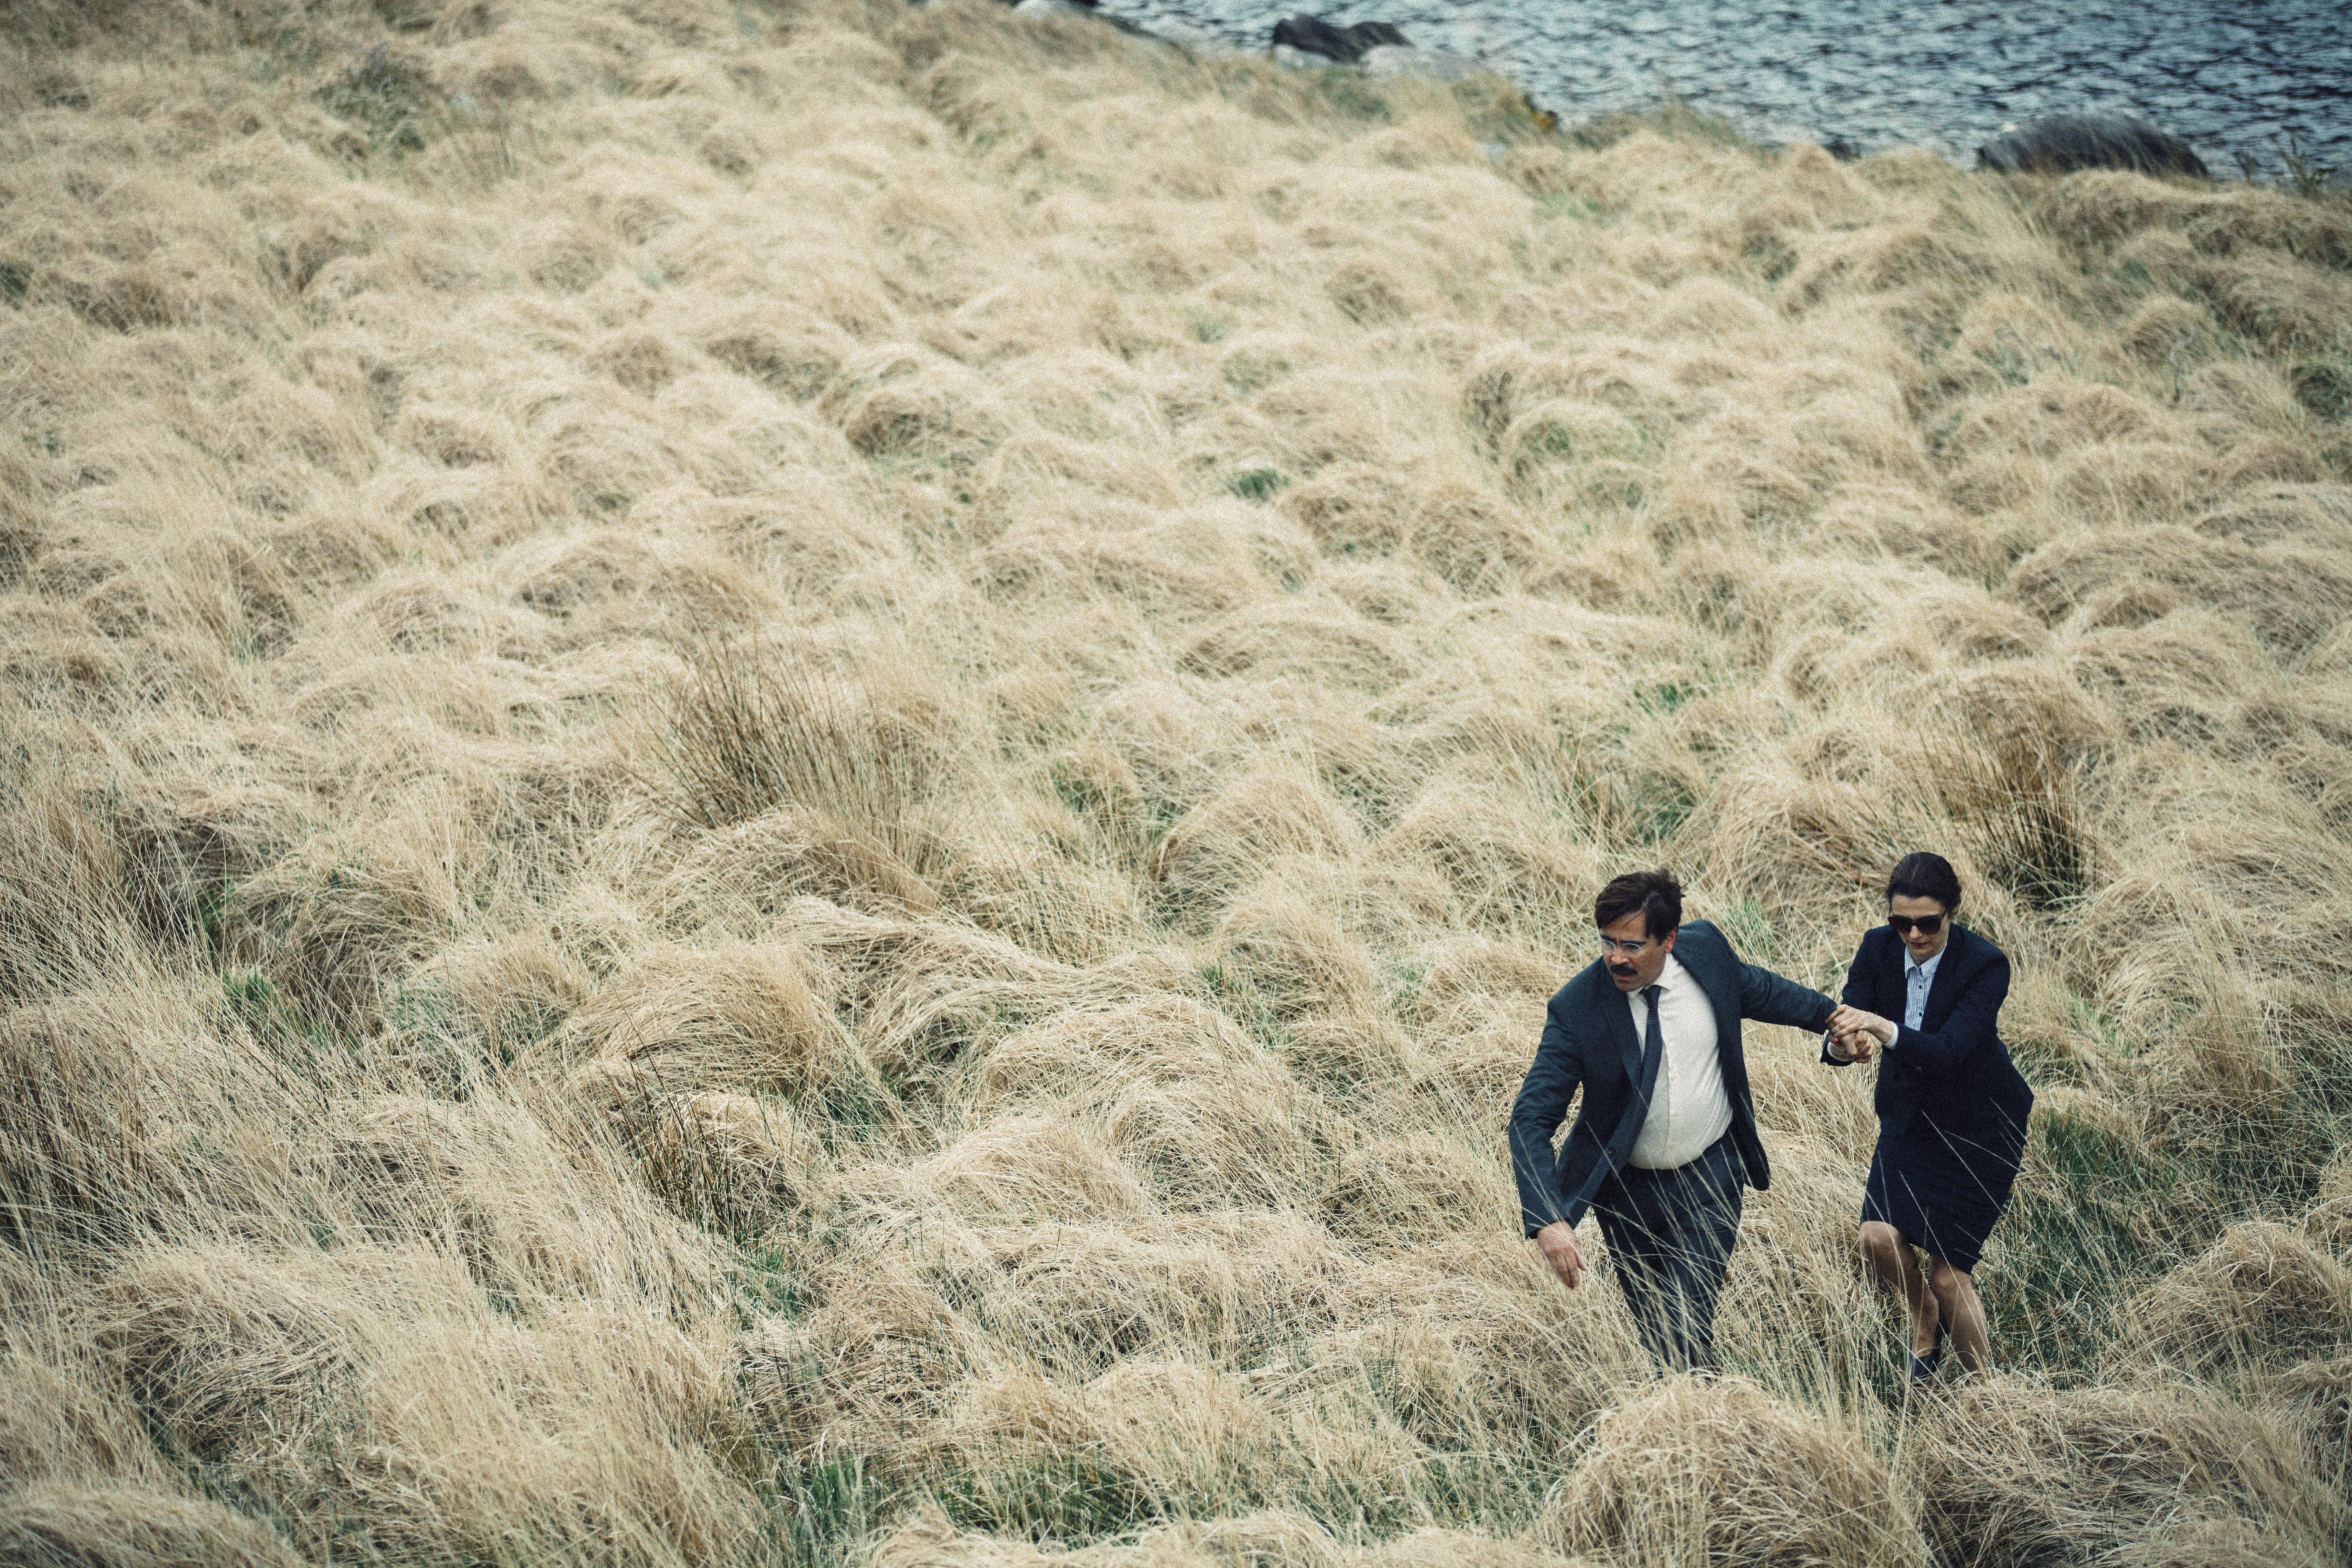 Still of Rachel Weisz and Colin Farrell in The Lobster (2015)